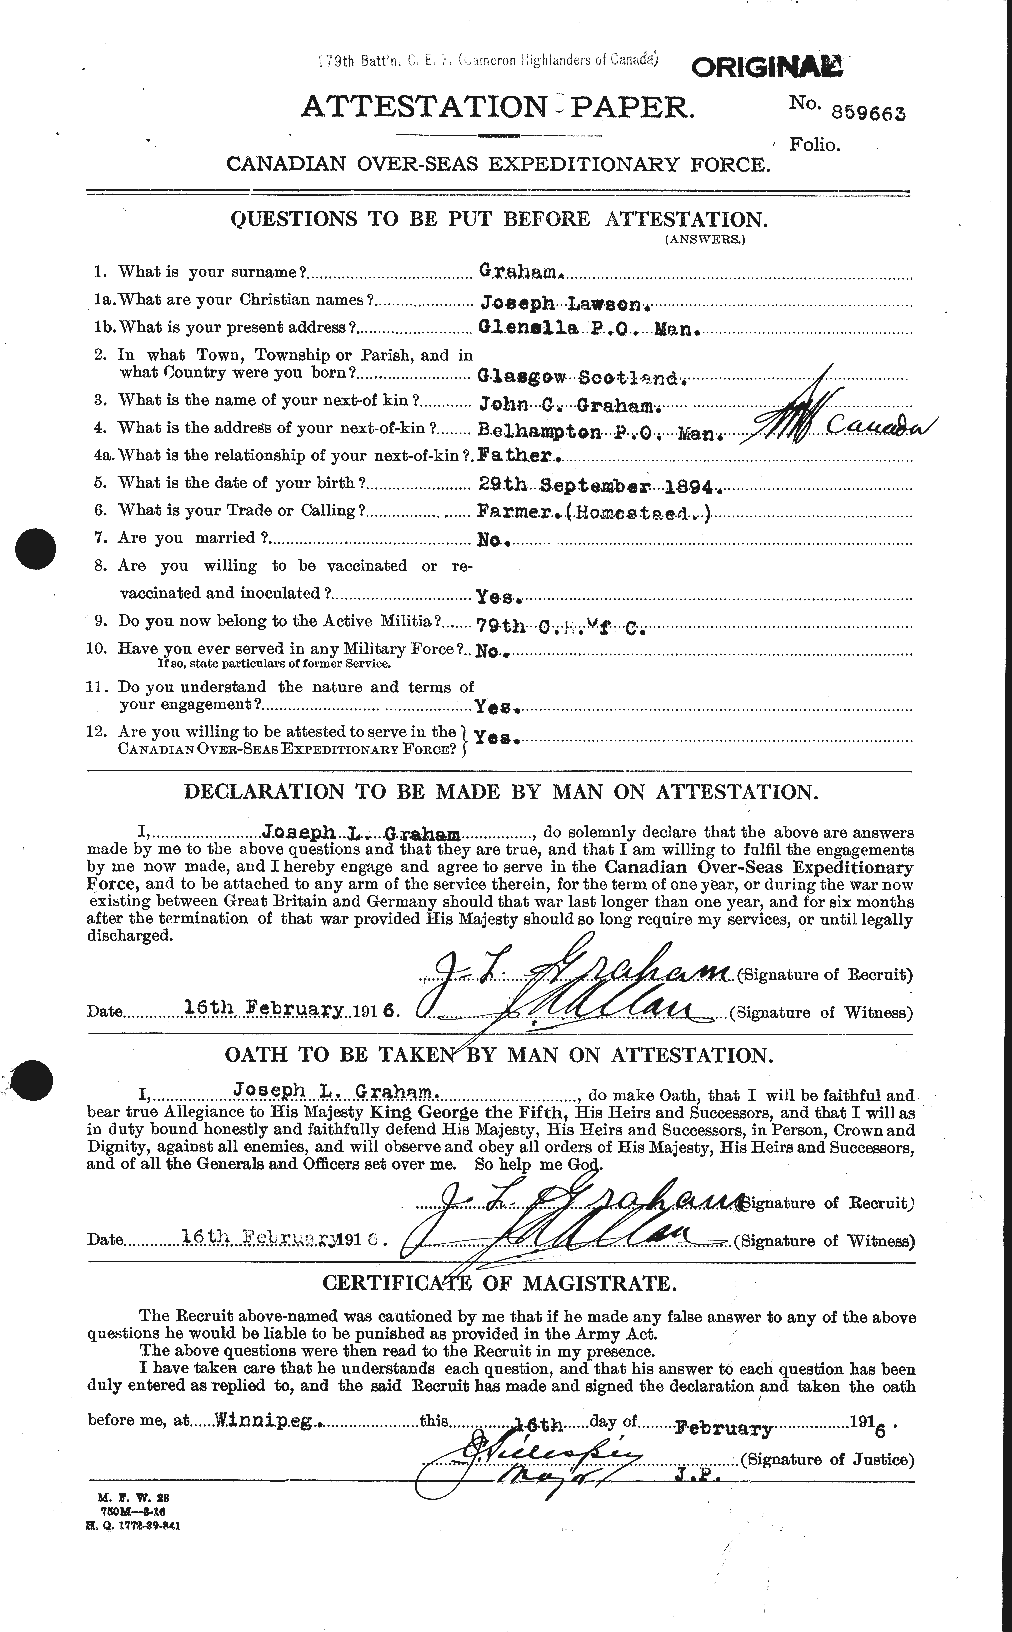 Personnel Records of the First World War - CEF 359251a